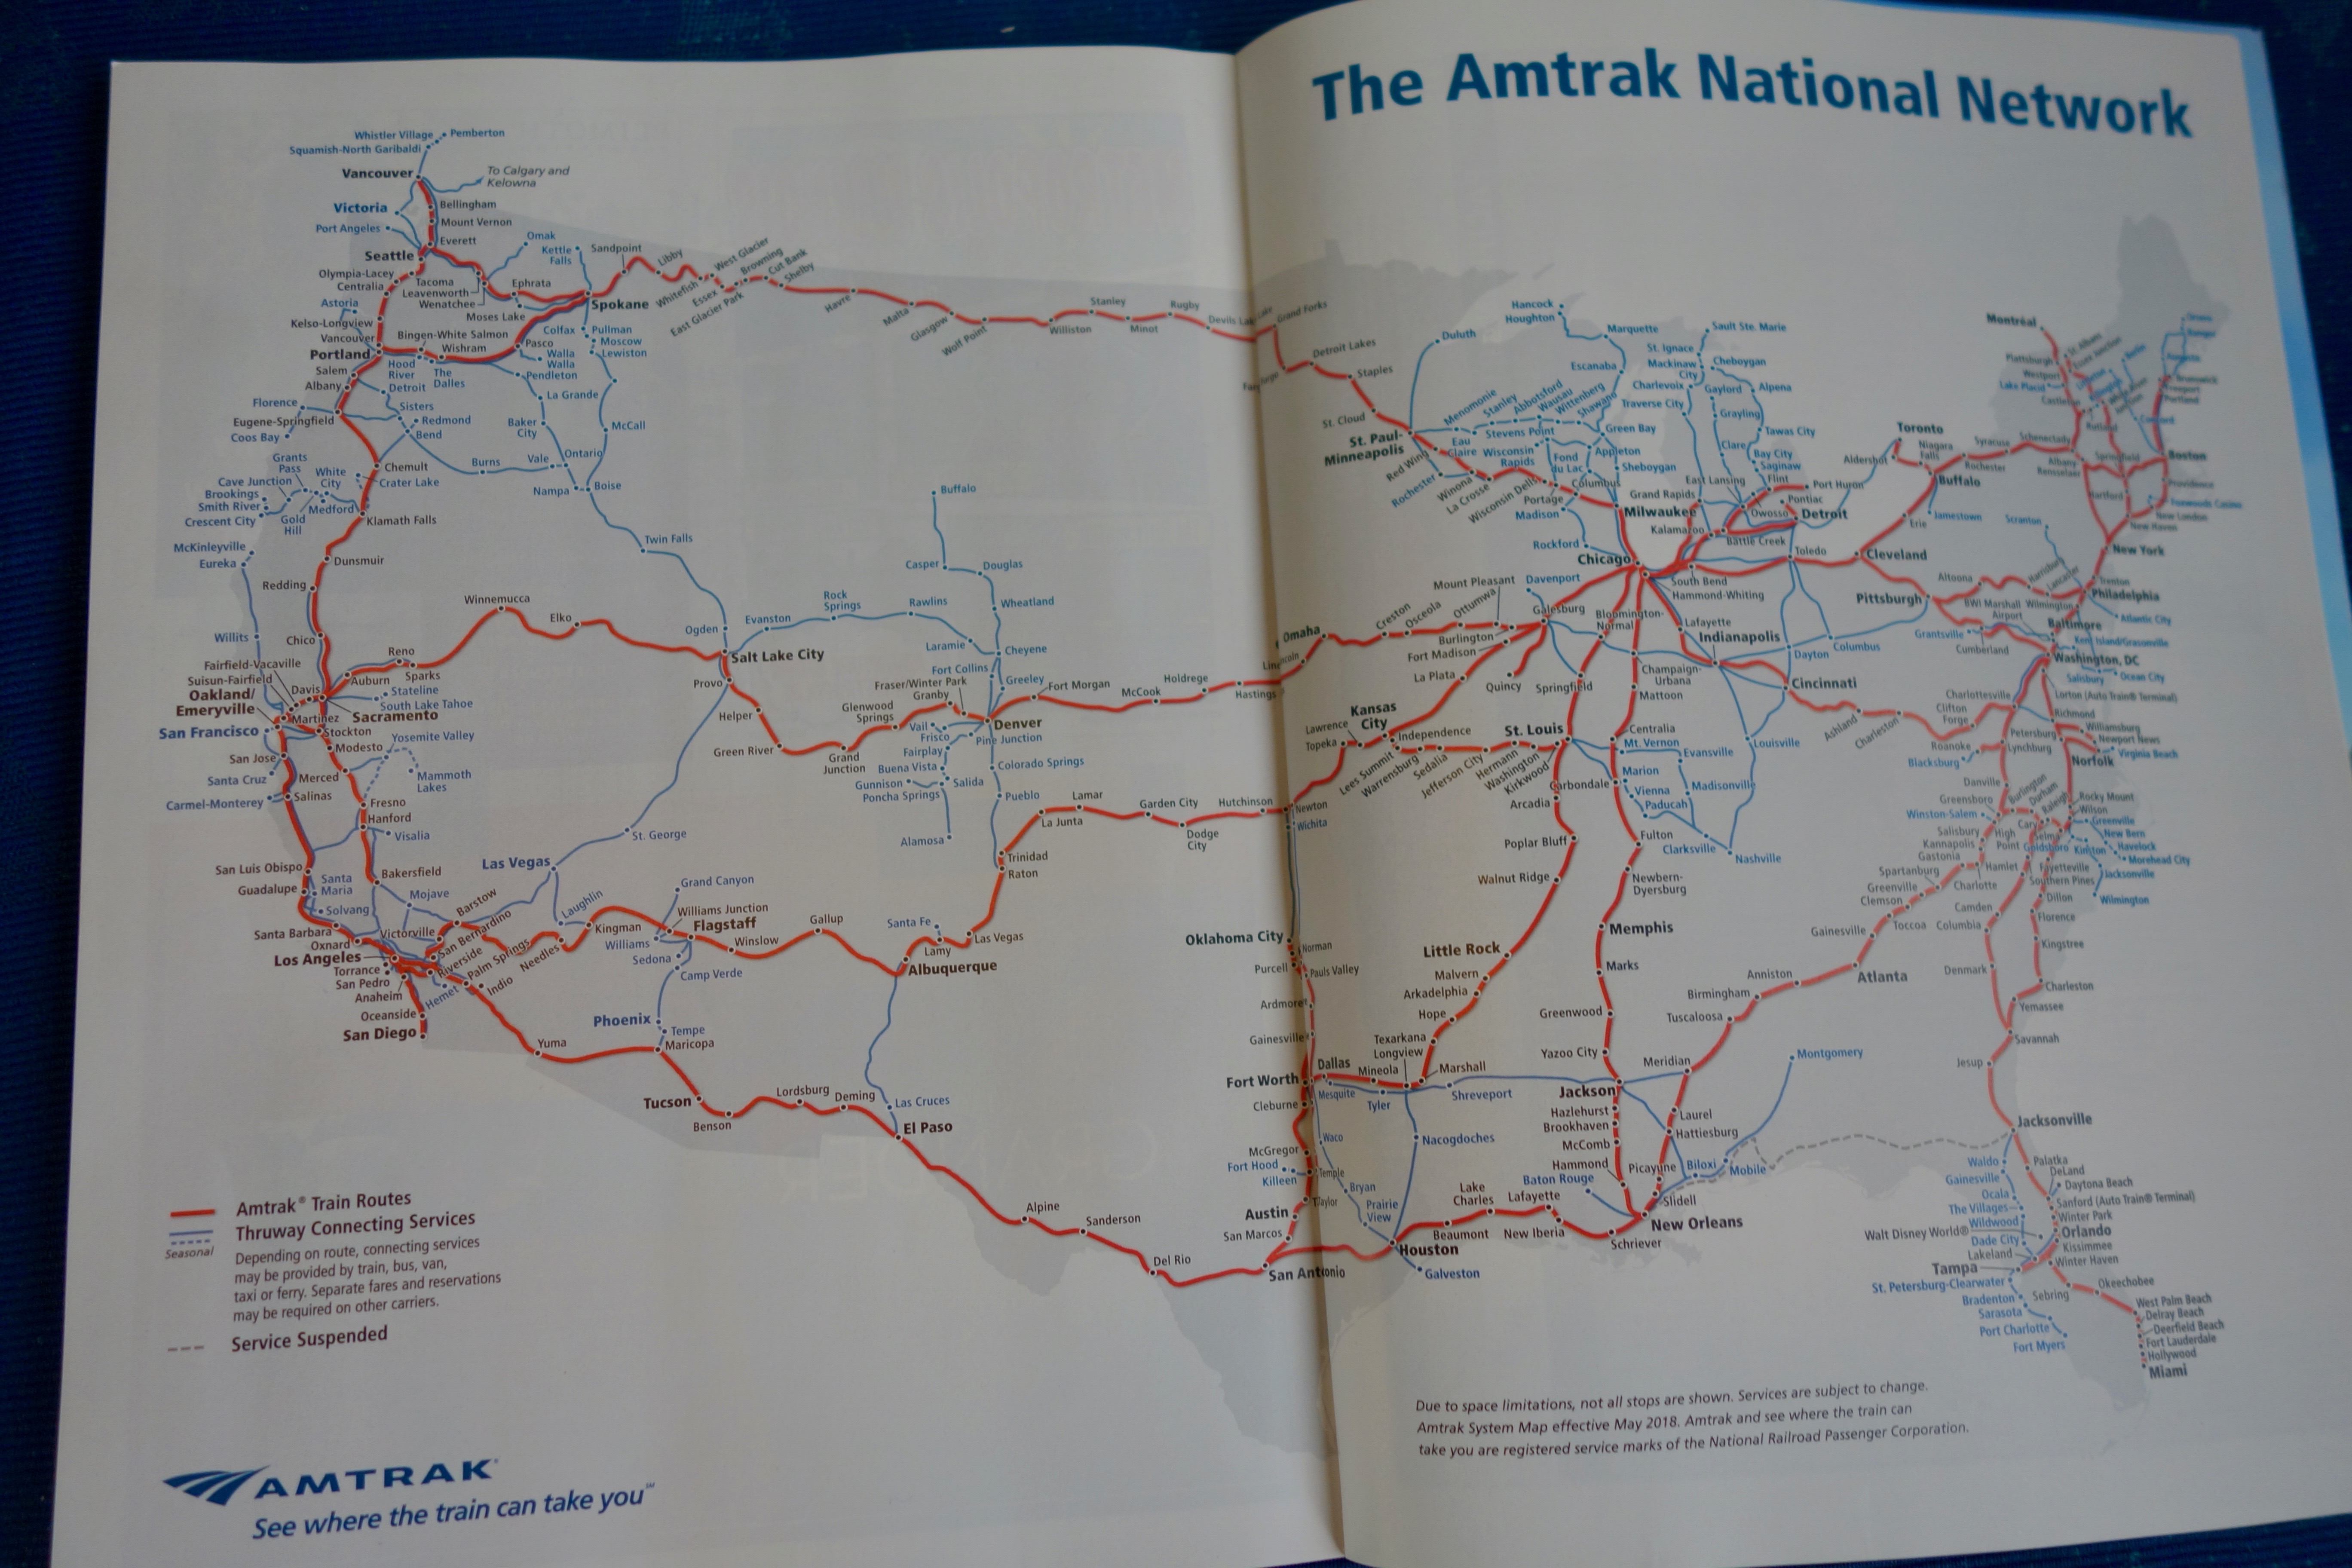 The national route map for Amtrak long-distance trains as shown in the monthly magazine.  